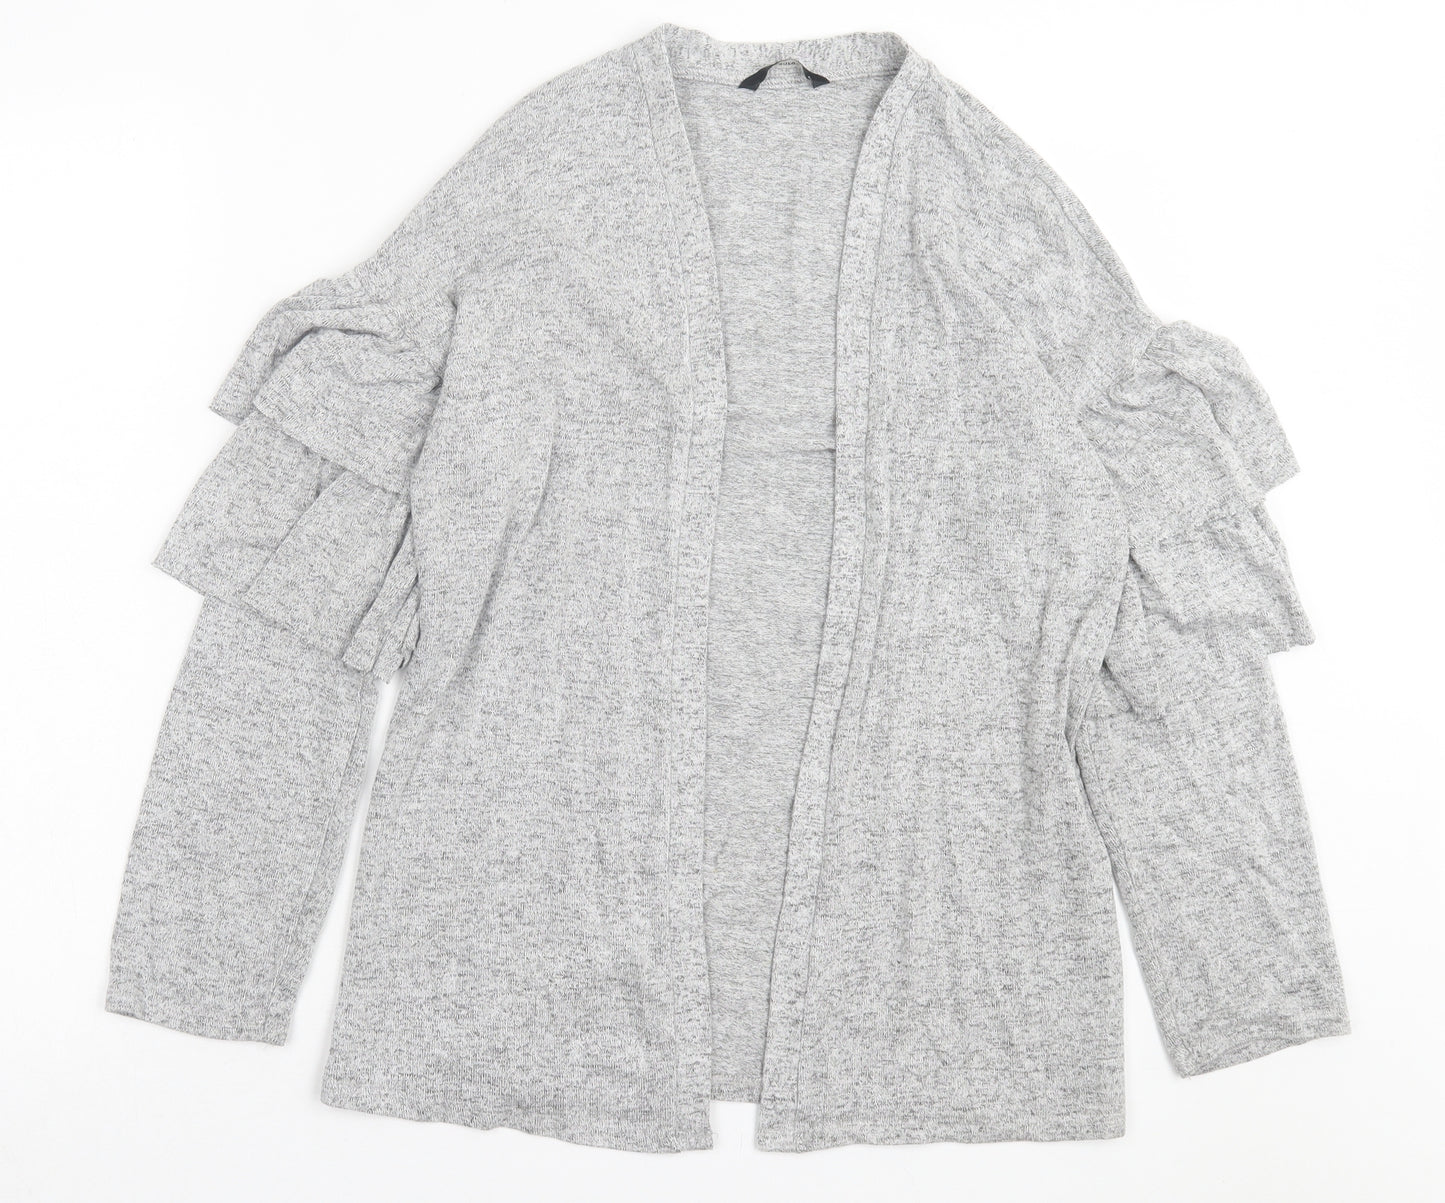 George Girls Grey V-Neck Polyester Cardigan Jumper Size 12-13 Years Pullover